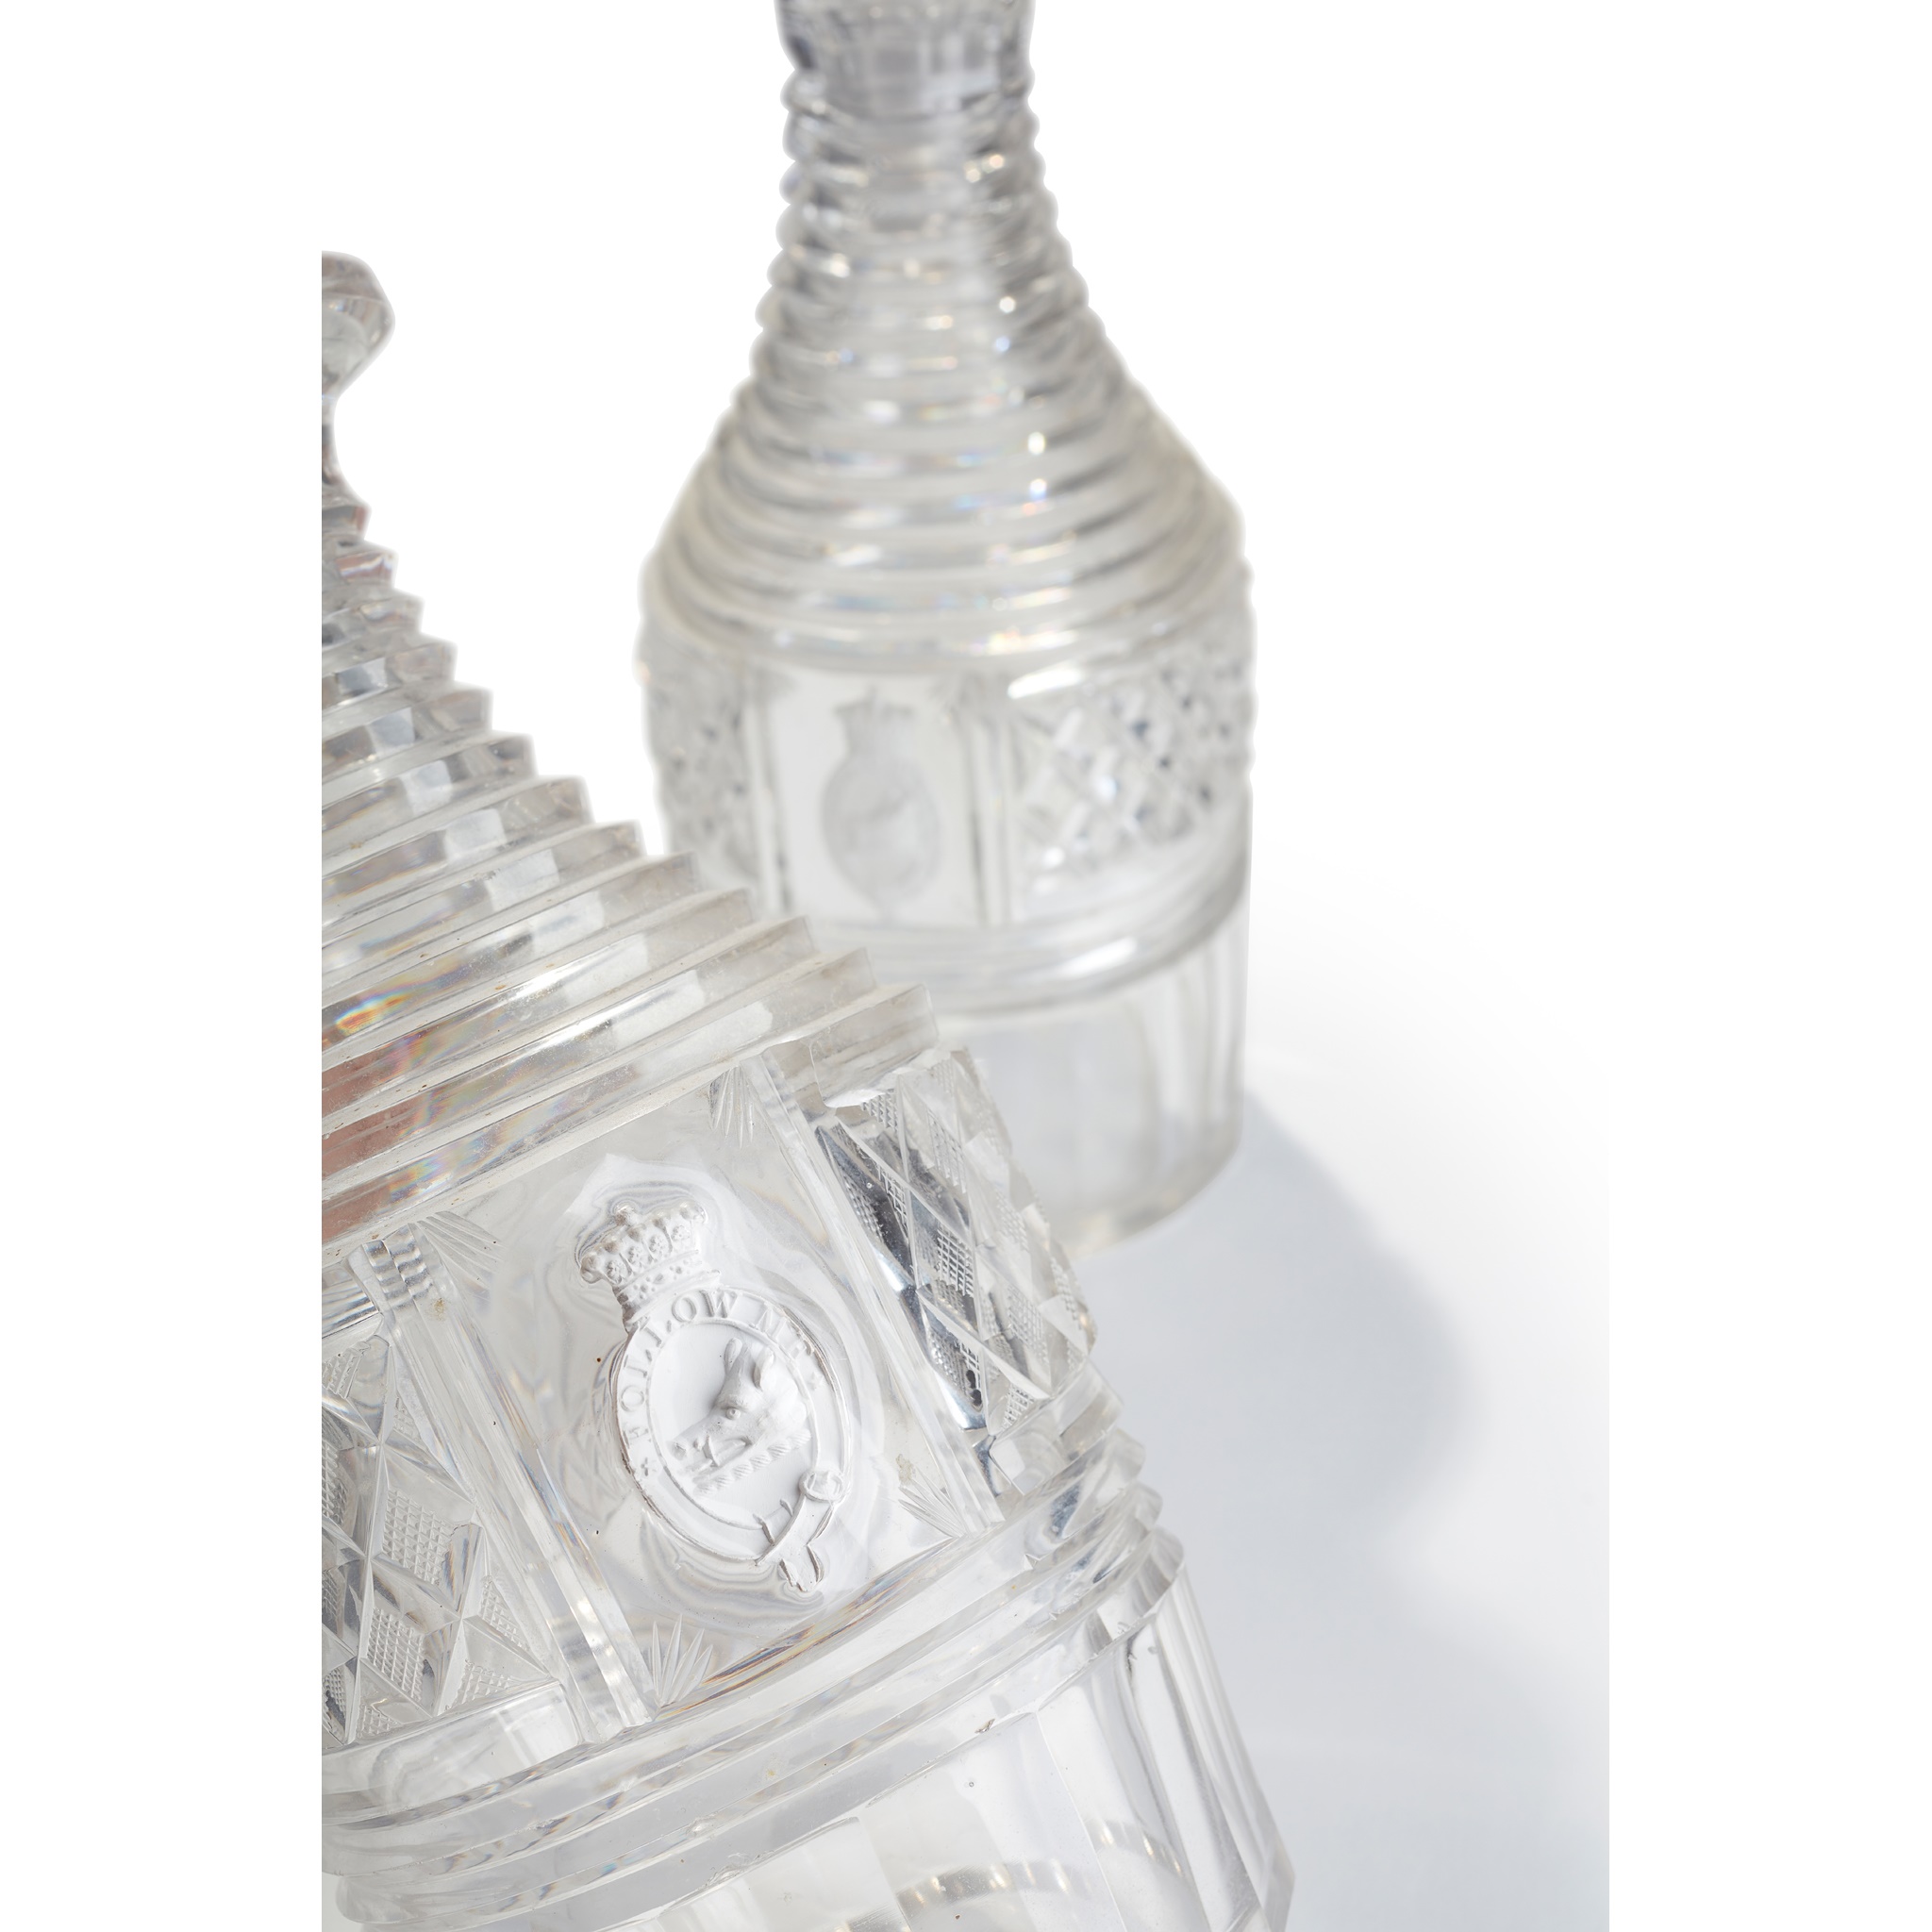 PAIR OF FULL BOTTLE DECANTERS BEARING THE BREADALBANE CREST AND MOTTO EARLY 19TH CENTURY - Image 6 of 8